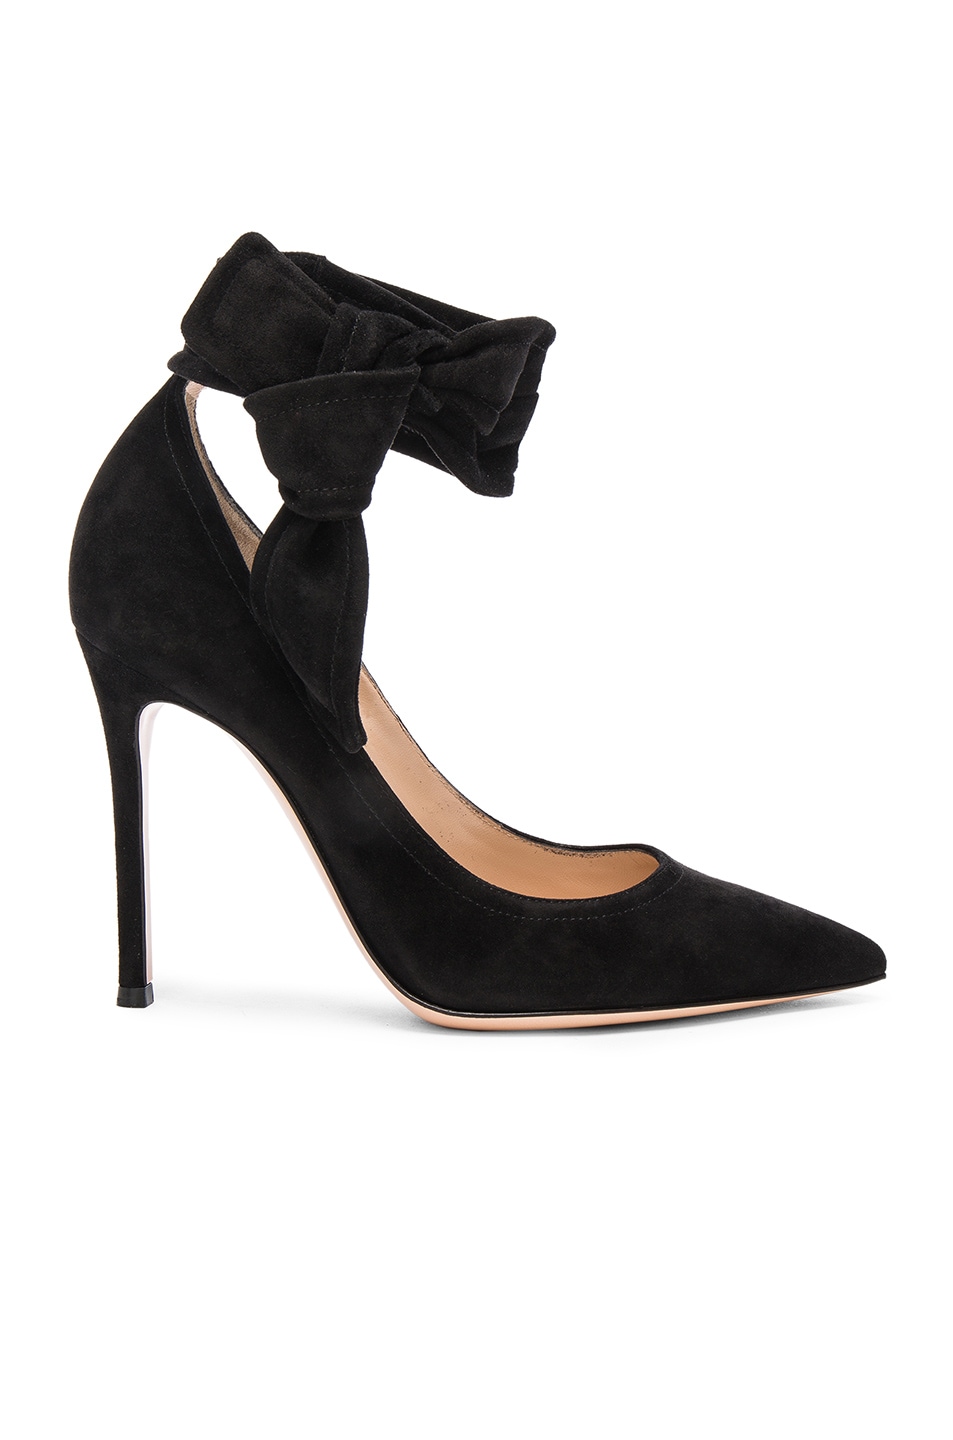 Image 1 of Gianvito Rossi Suede Lane Pumps in Black